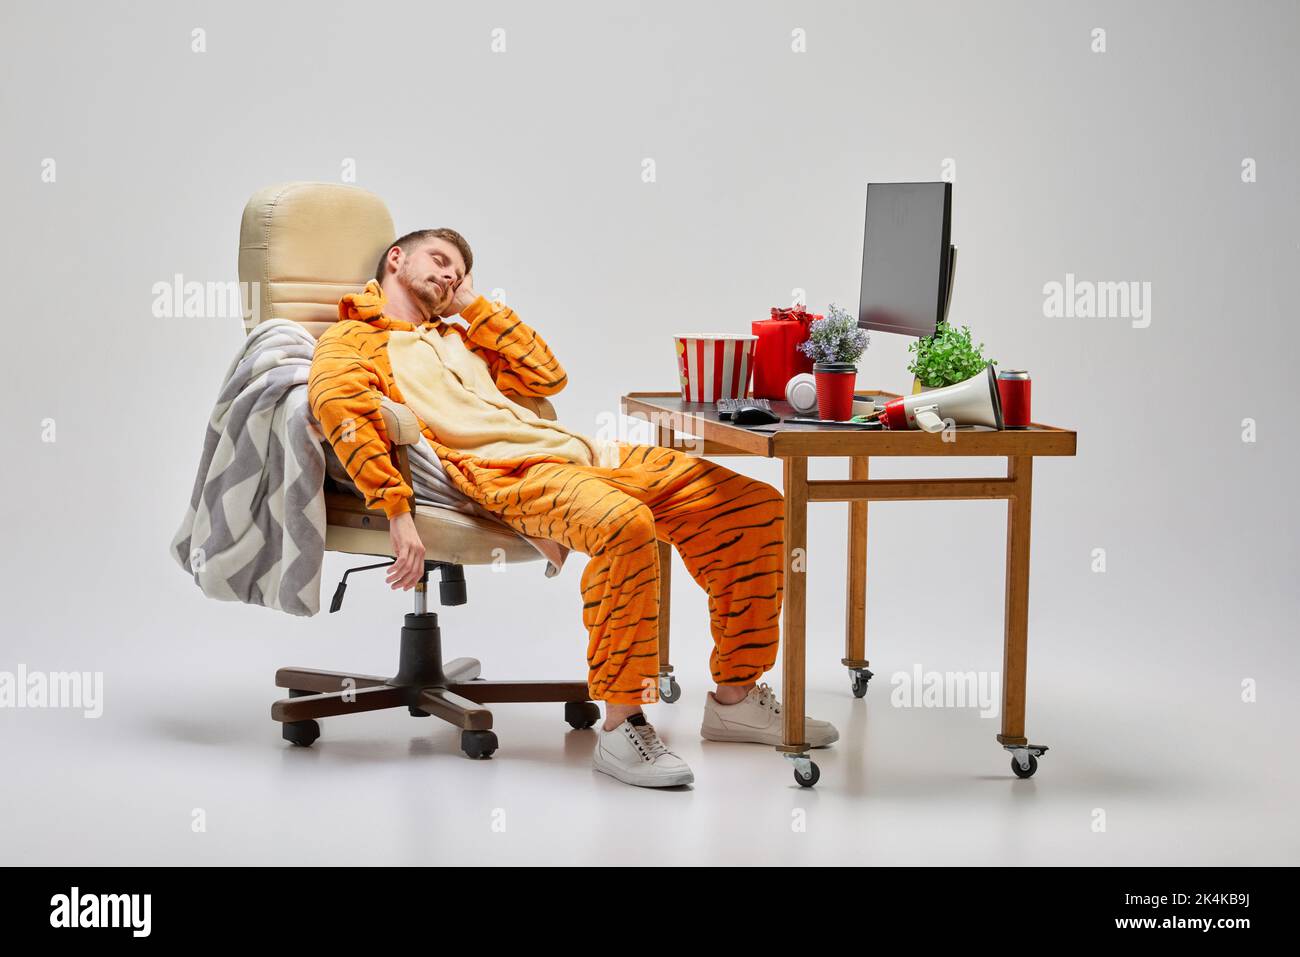 Napping. Young man in amazing costume sitting at computer desk and sleeping. Art, ideas, creativity, working and holidays concept Stock Photo